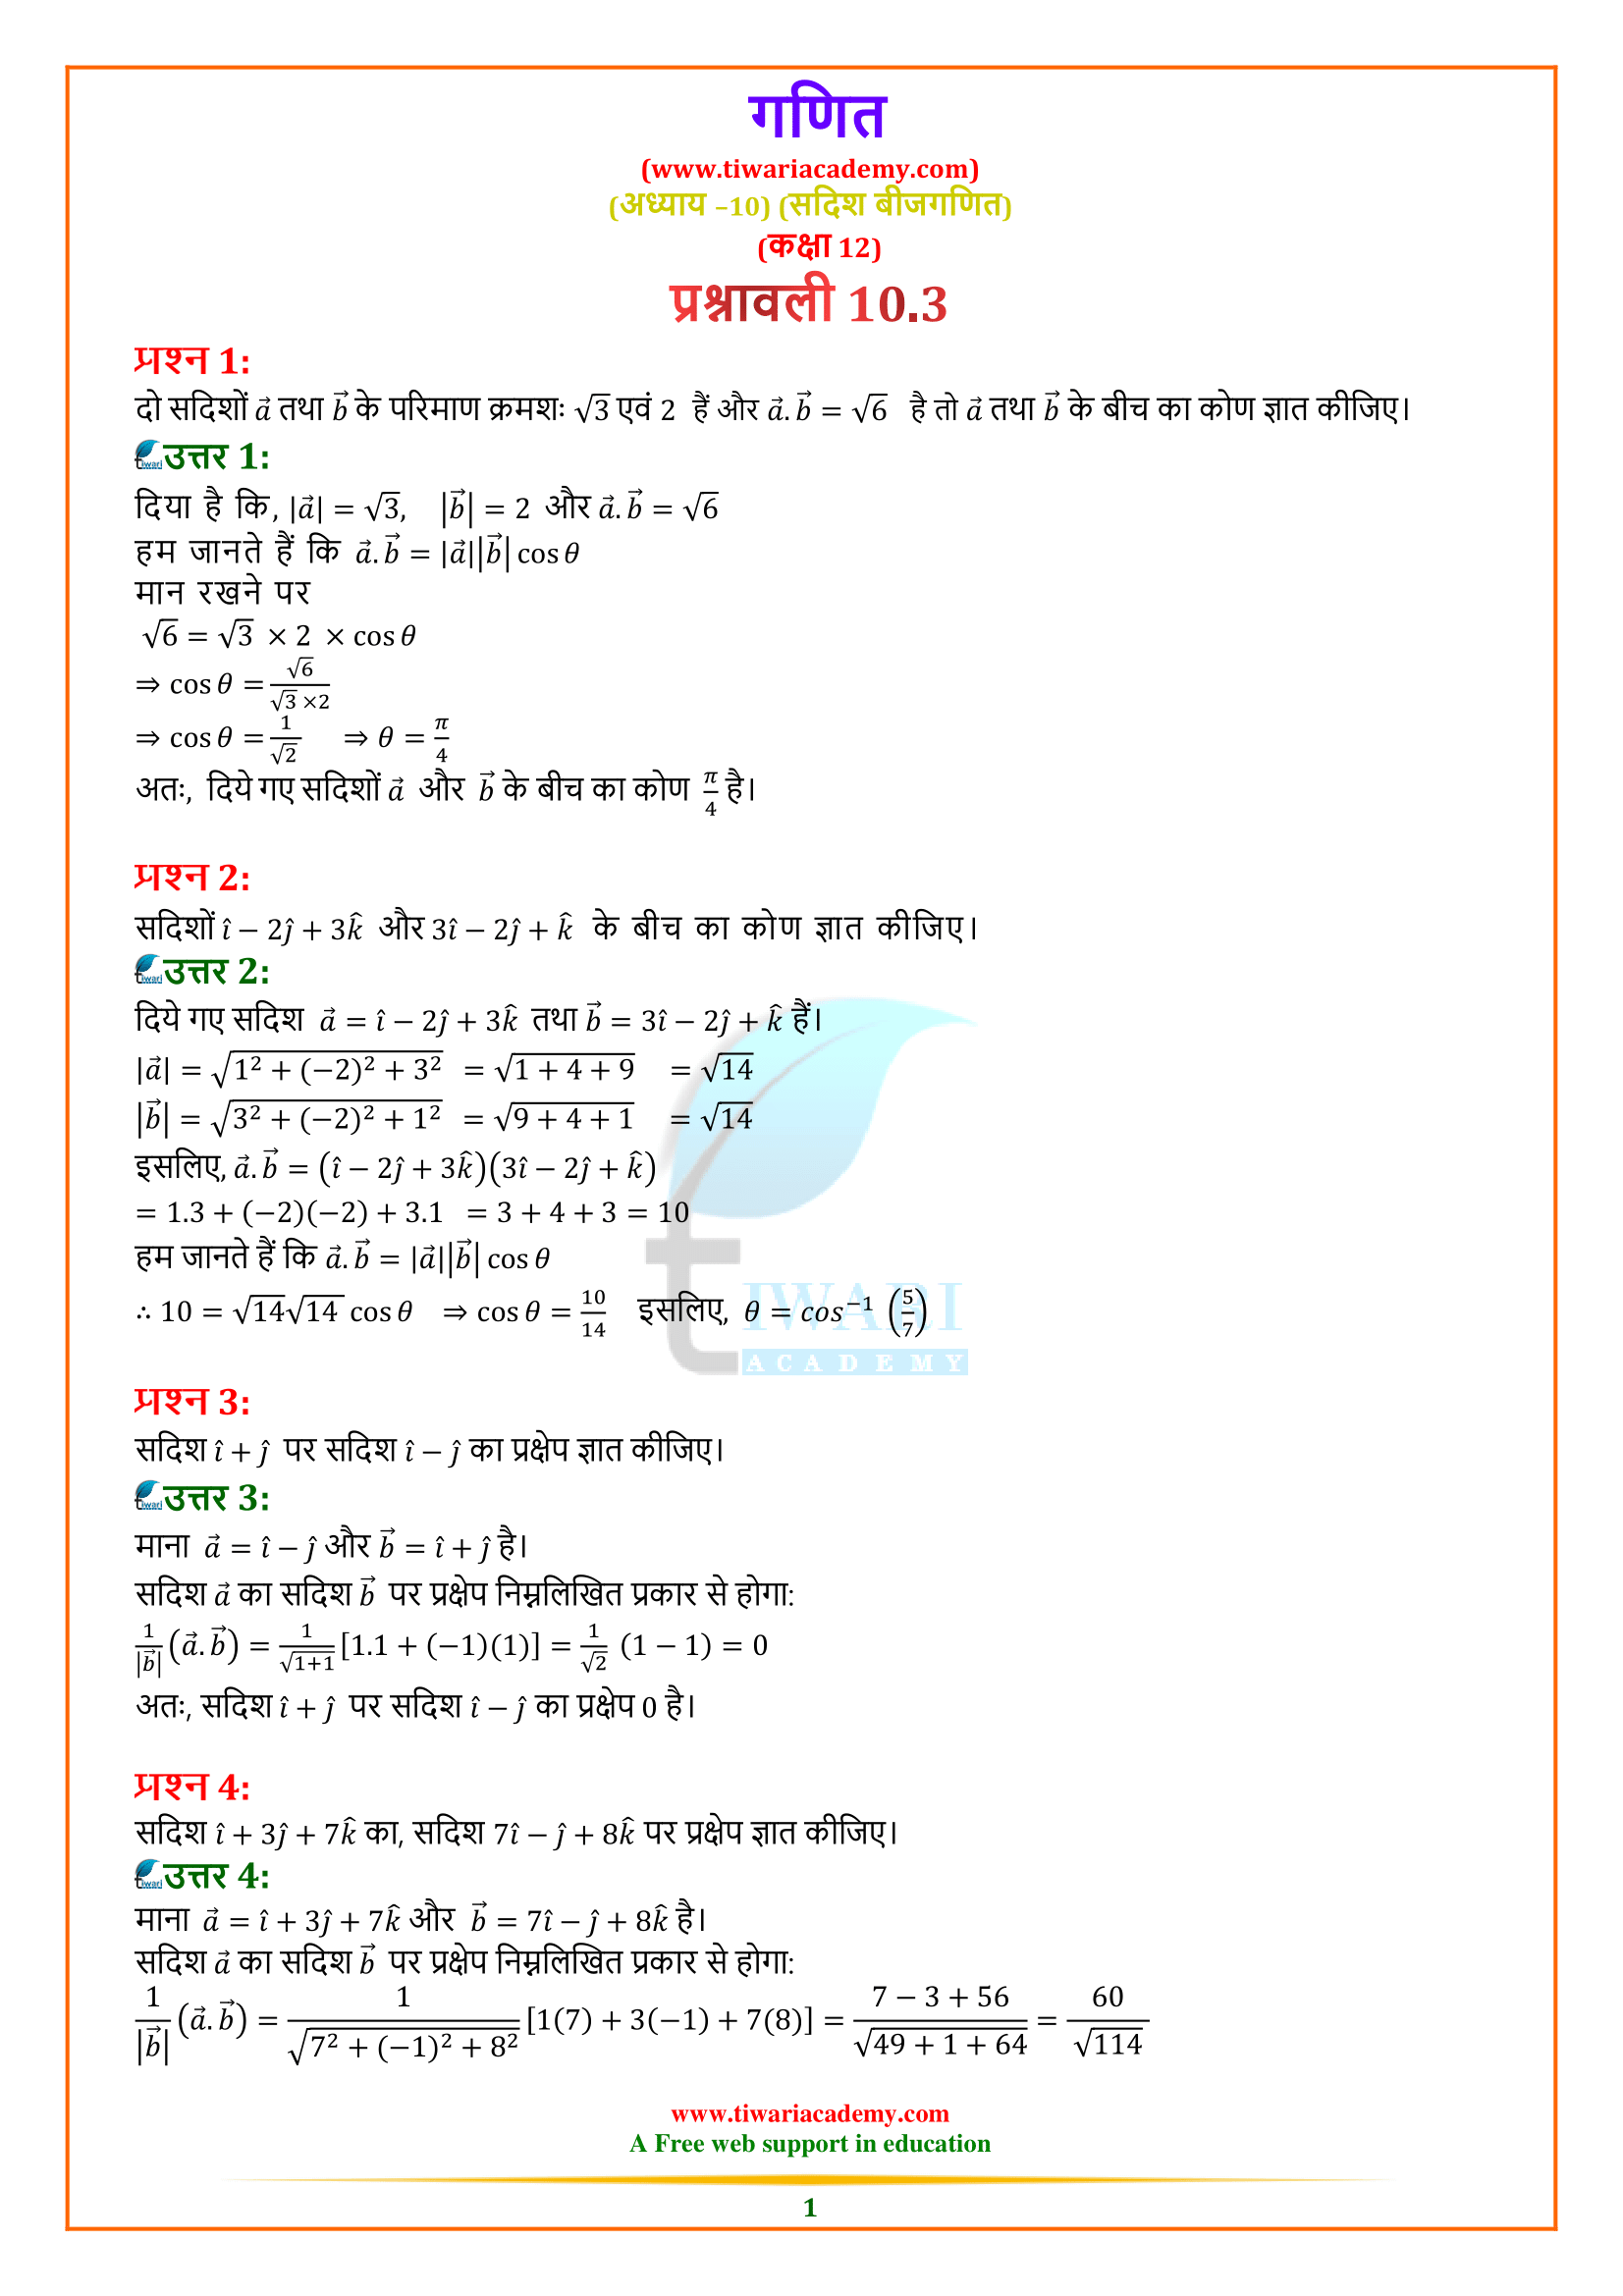 NCERT Solutions for Class 12 Maths Exercise 10.3 in Hindi Medium